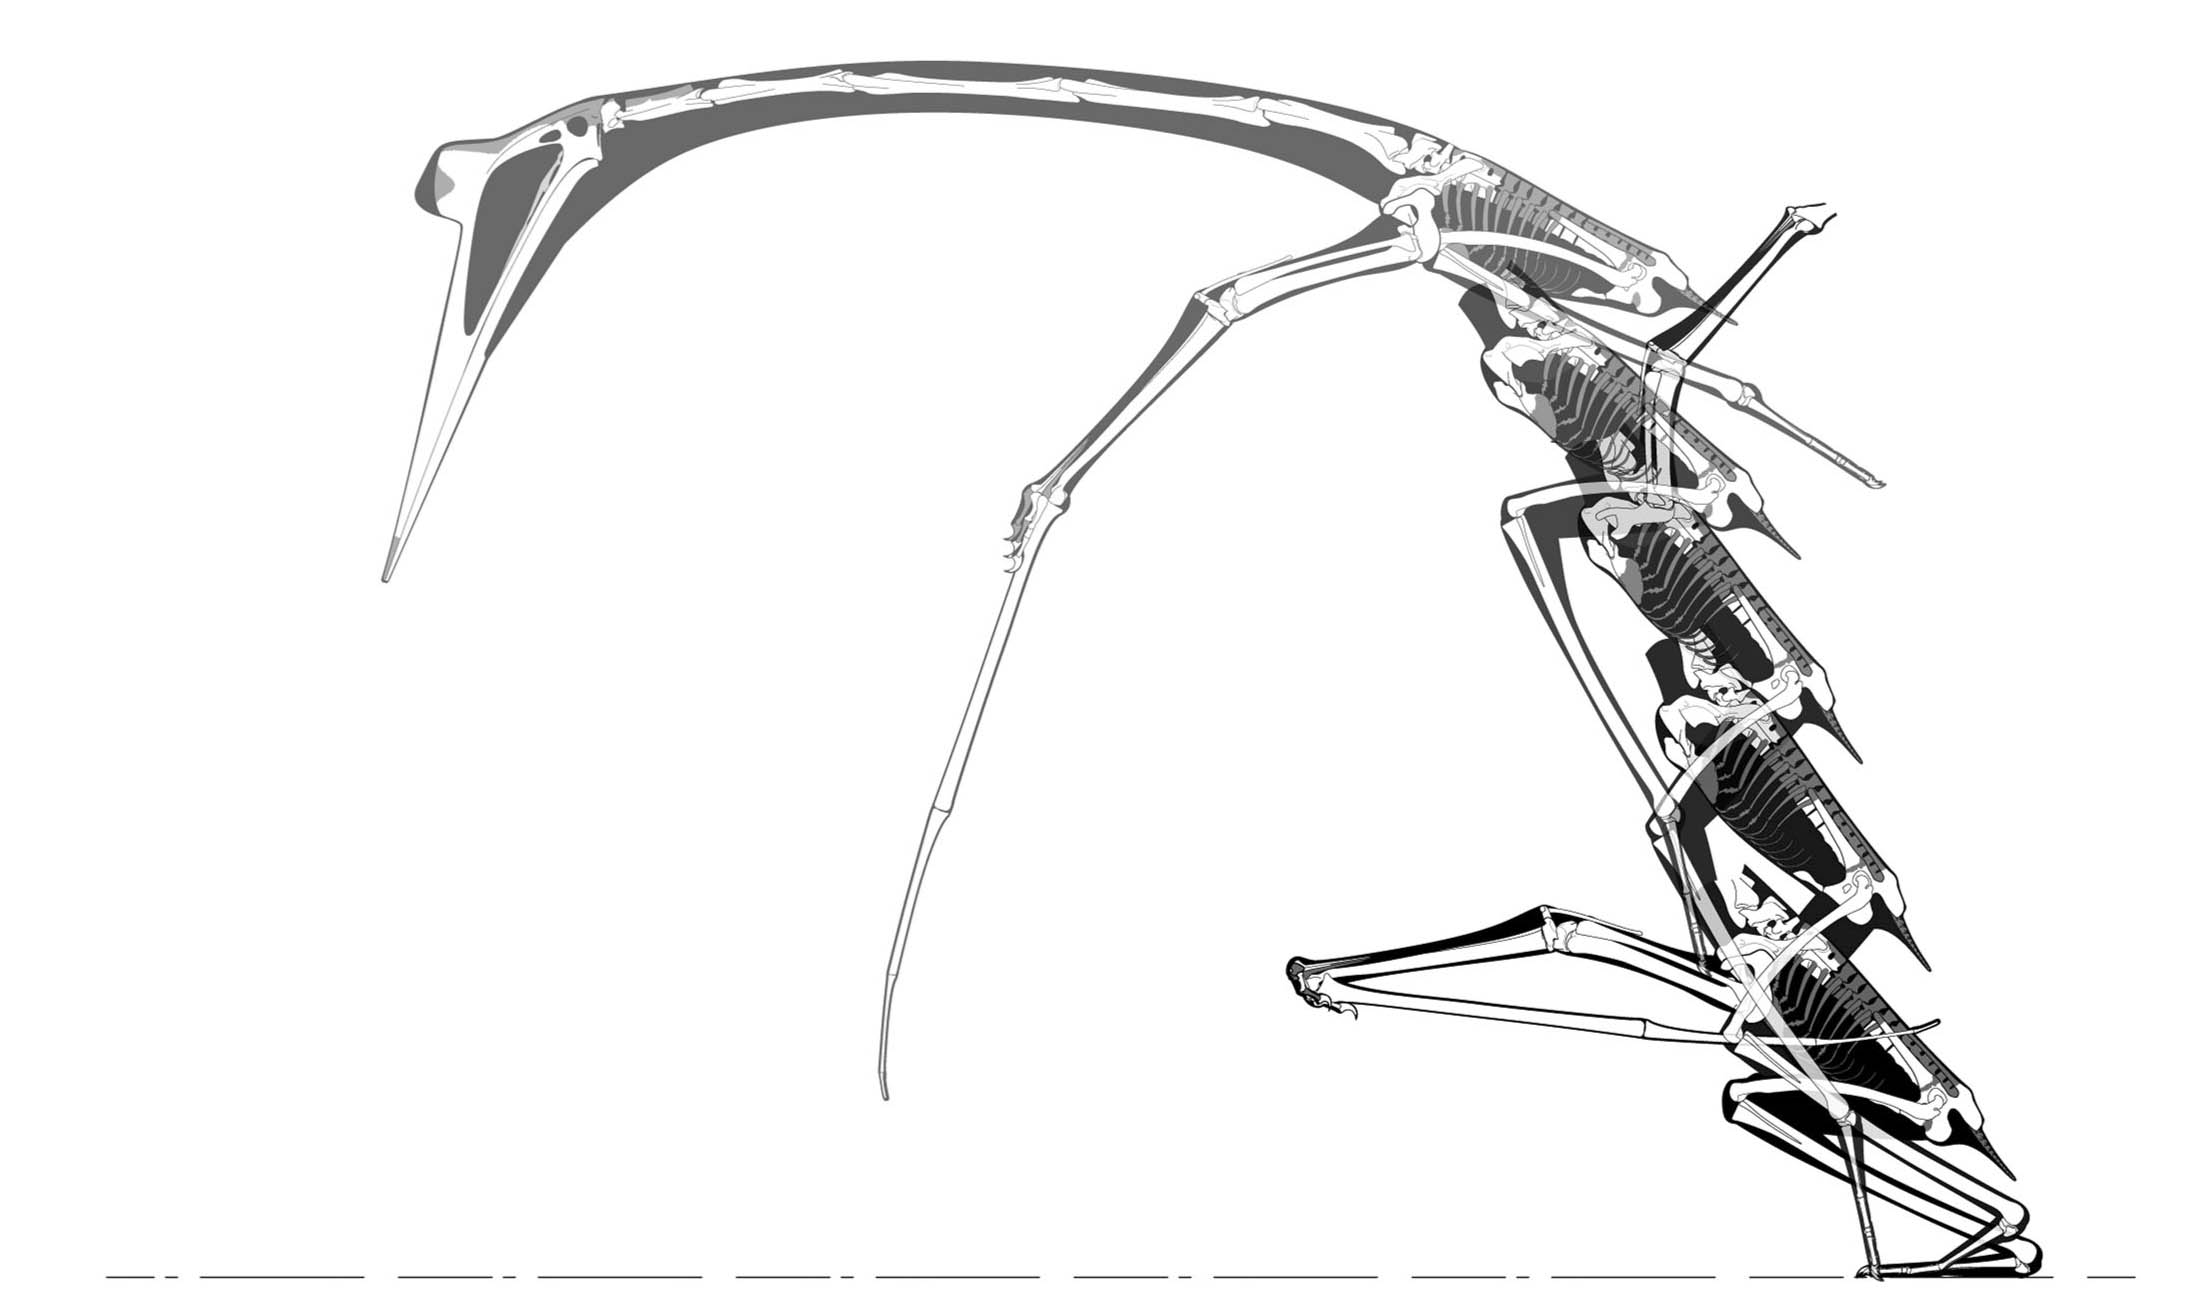 Fossil of oldest pterodactyl discovered in Utah desert